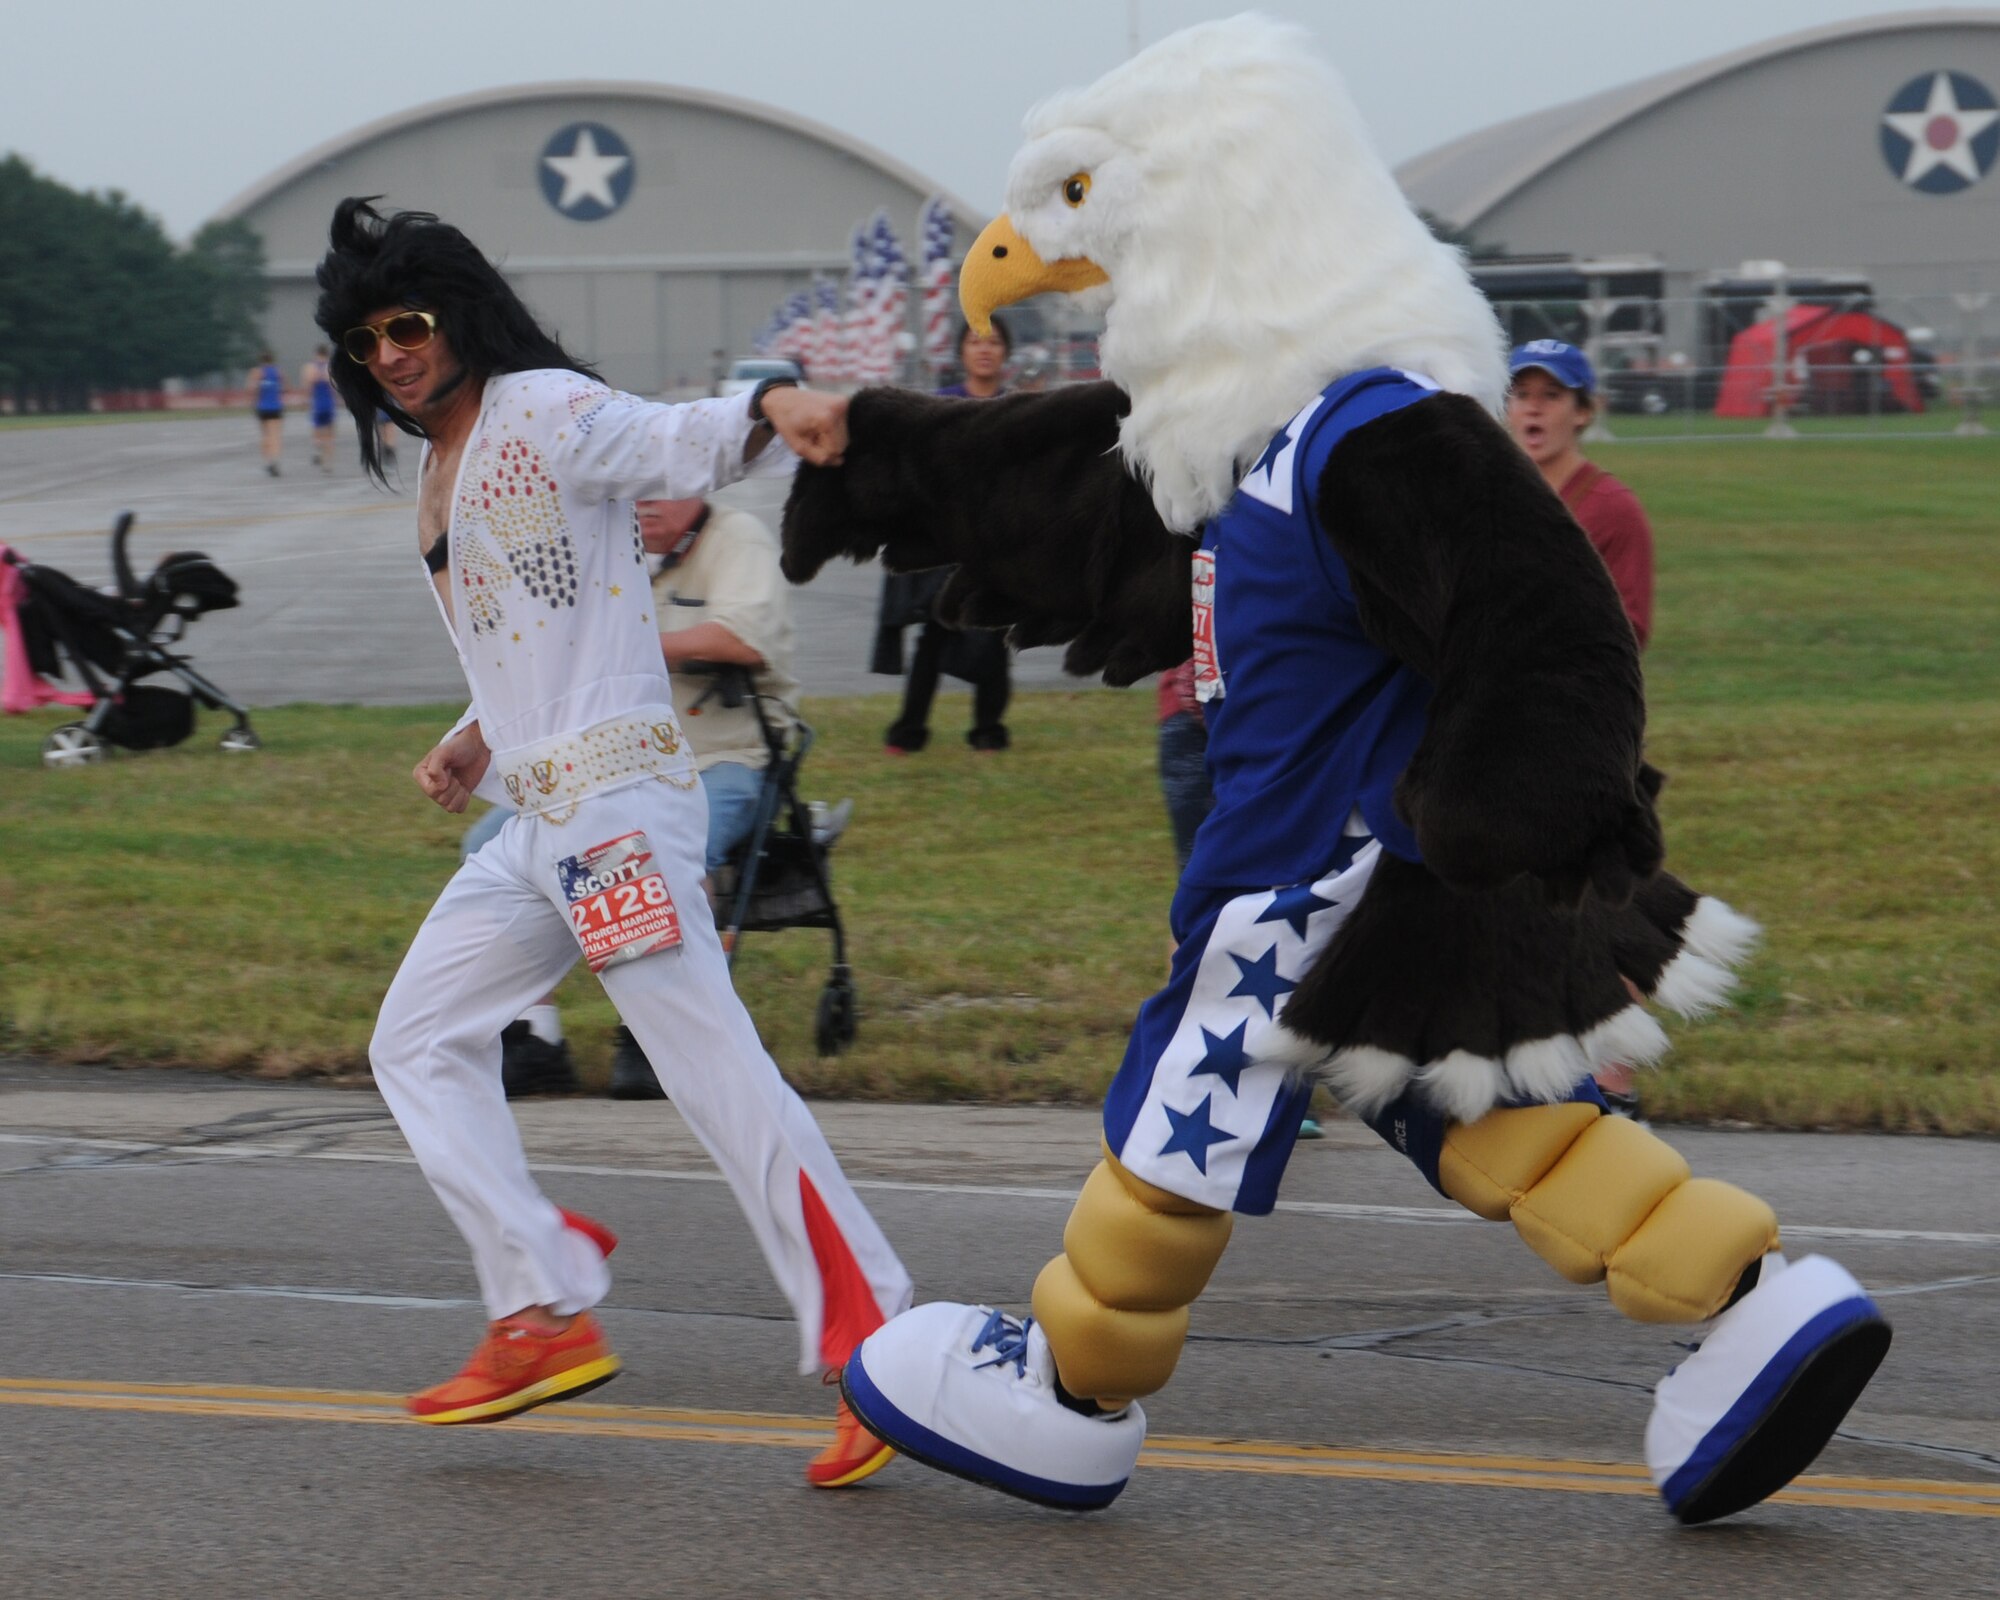 Tailwind, the U. S. Air Force Marathon mascot, encourages Elvis by giving him a fist bump at the start of the race at Wright-Patterson Air Force Base, Ohio, Sept. 17, 2016. The U. S. Air Force Marathon introduced Tailwind, an eagle in running shoes, this year in celebration of the 20th anniversary.  (U.S. Air National Guard photo/Staff Sgt. Lindsey Soulsby)